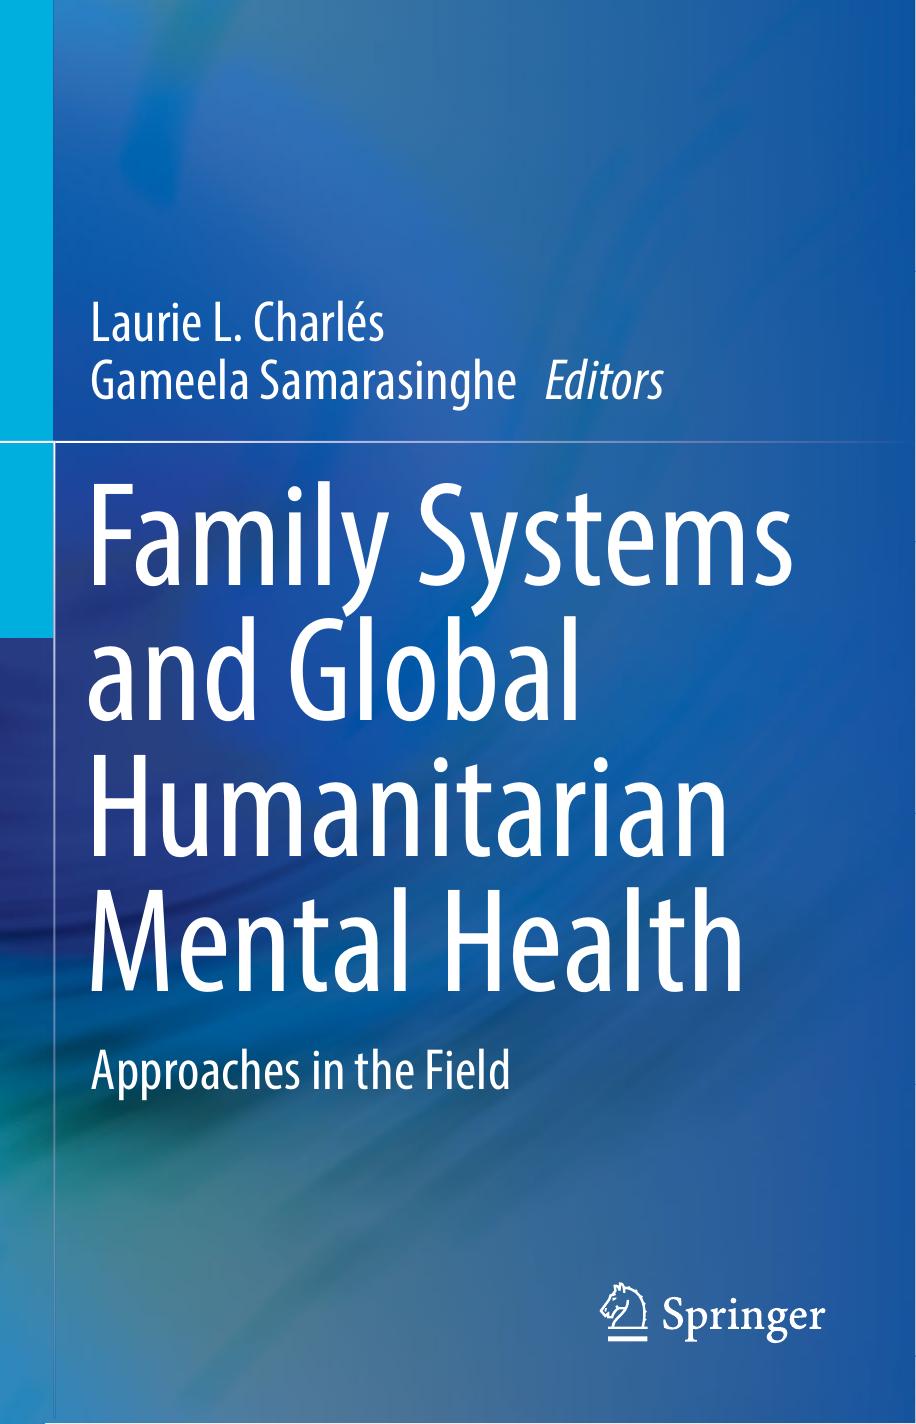 Family Systems and Global Humanitarian Mental Health  Approaches in the Field (2020)